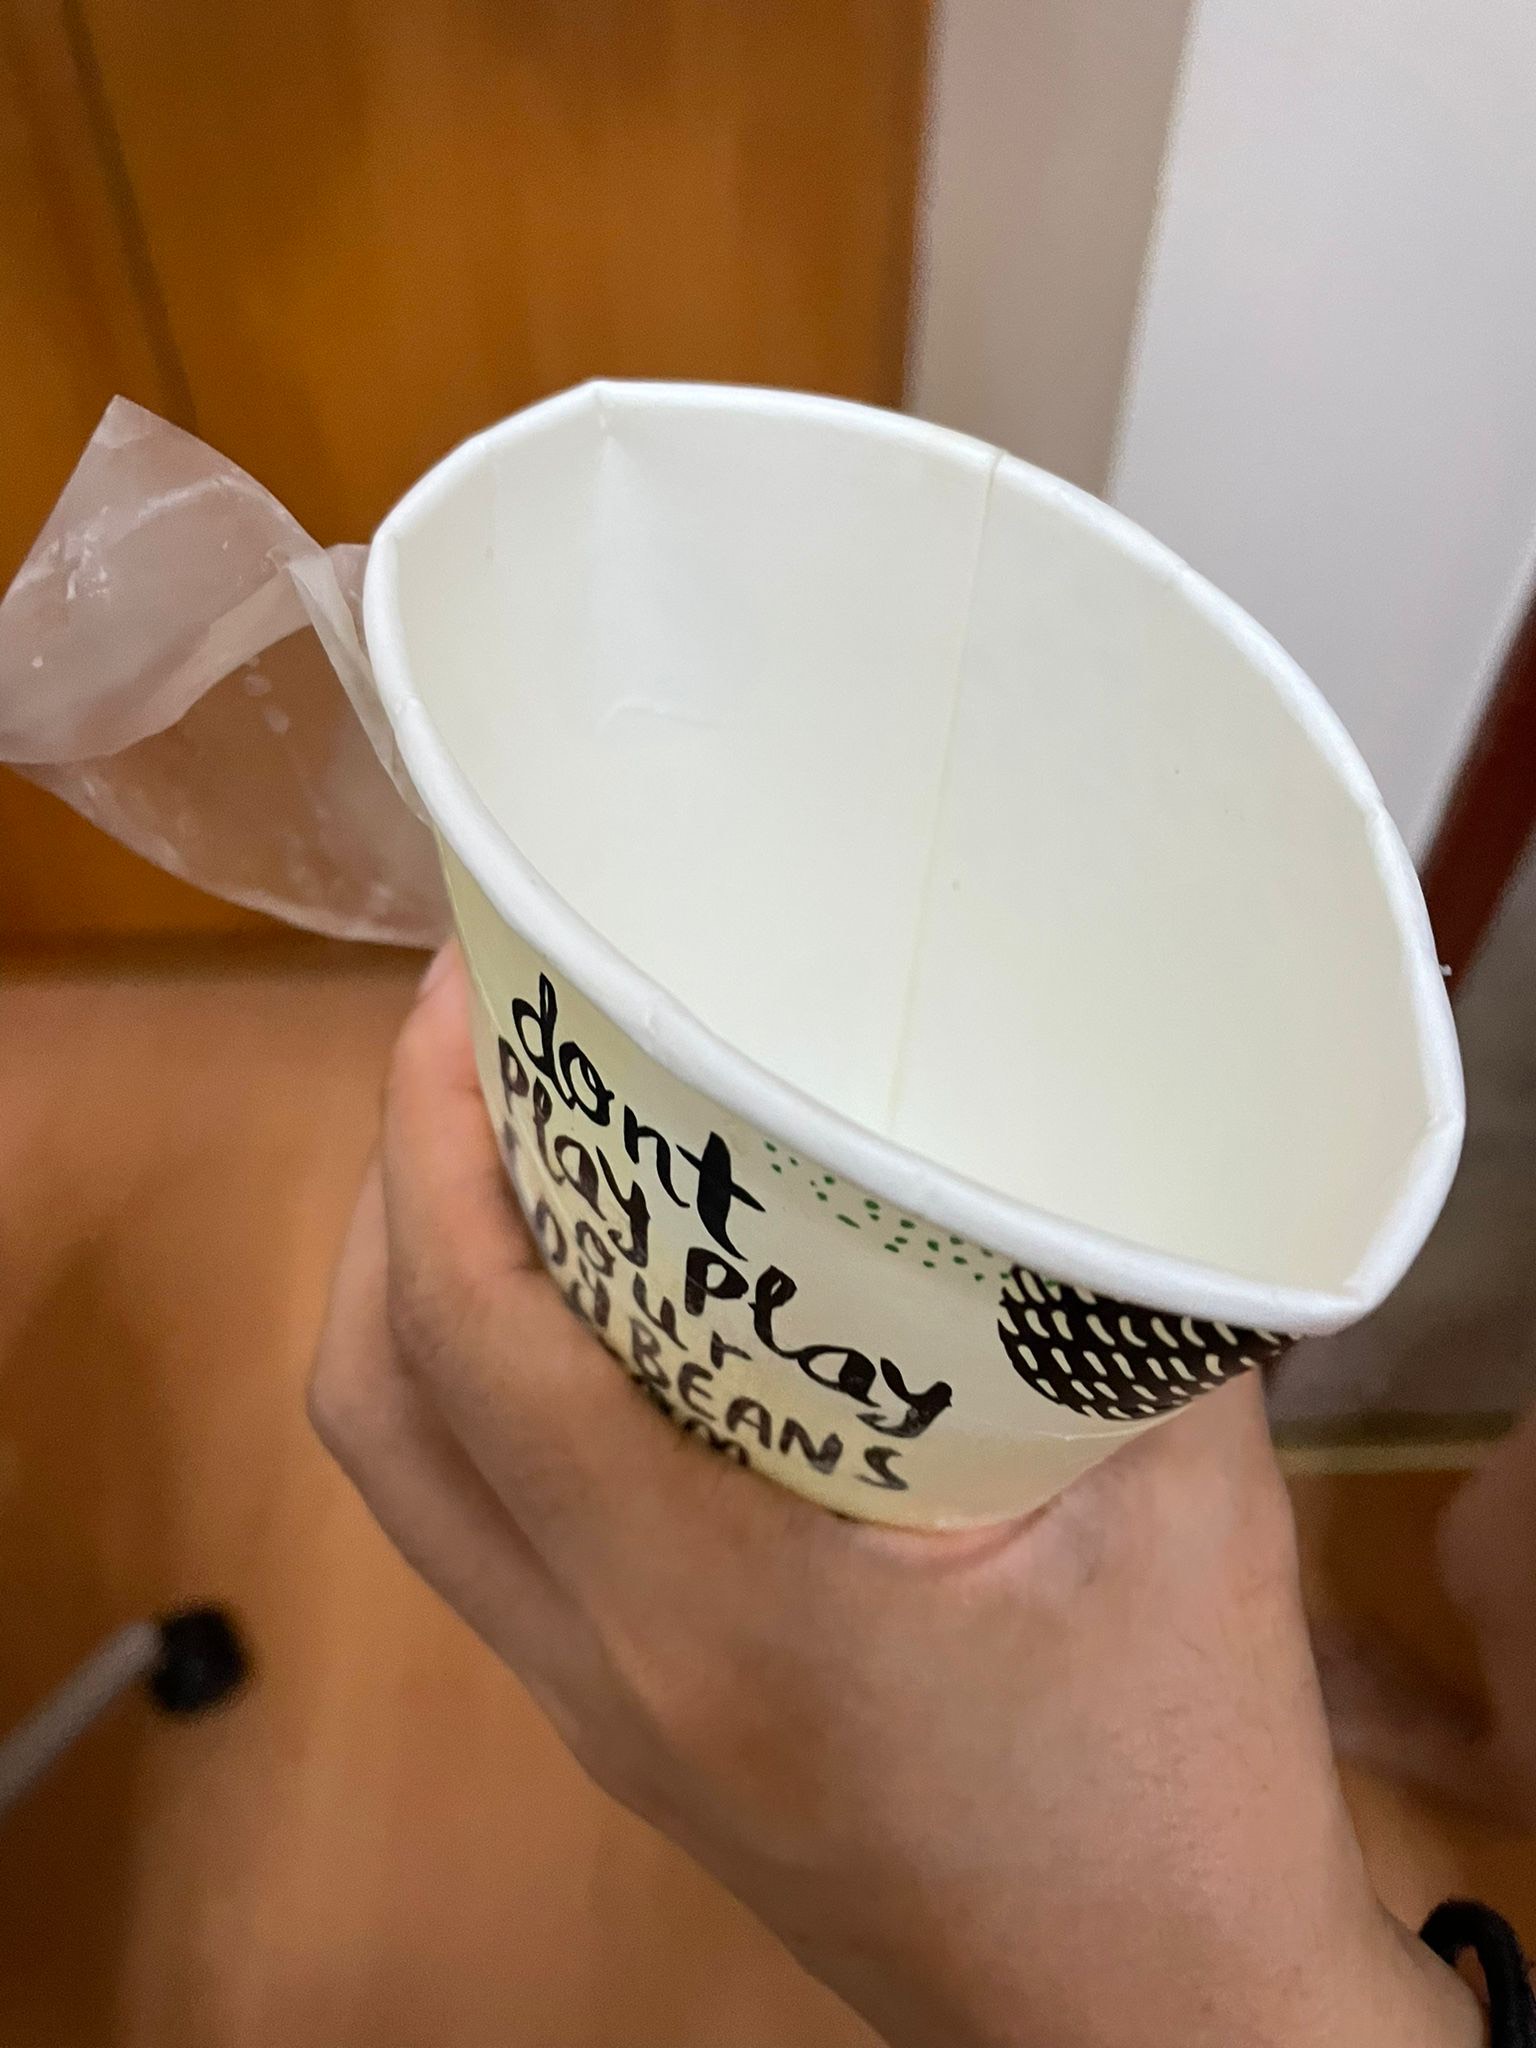 The-paper-cup-that-crumpled-inwards.jpg